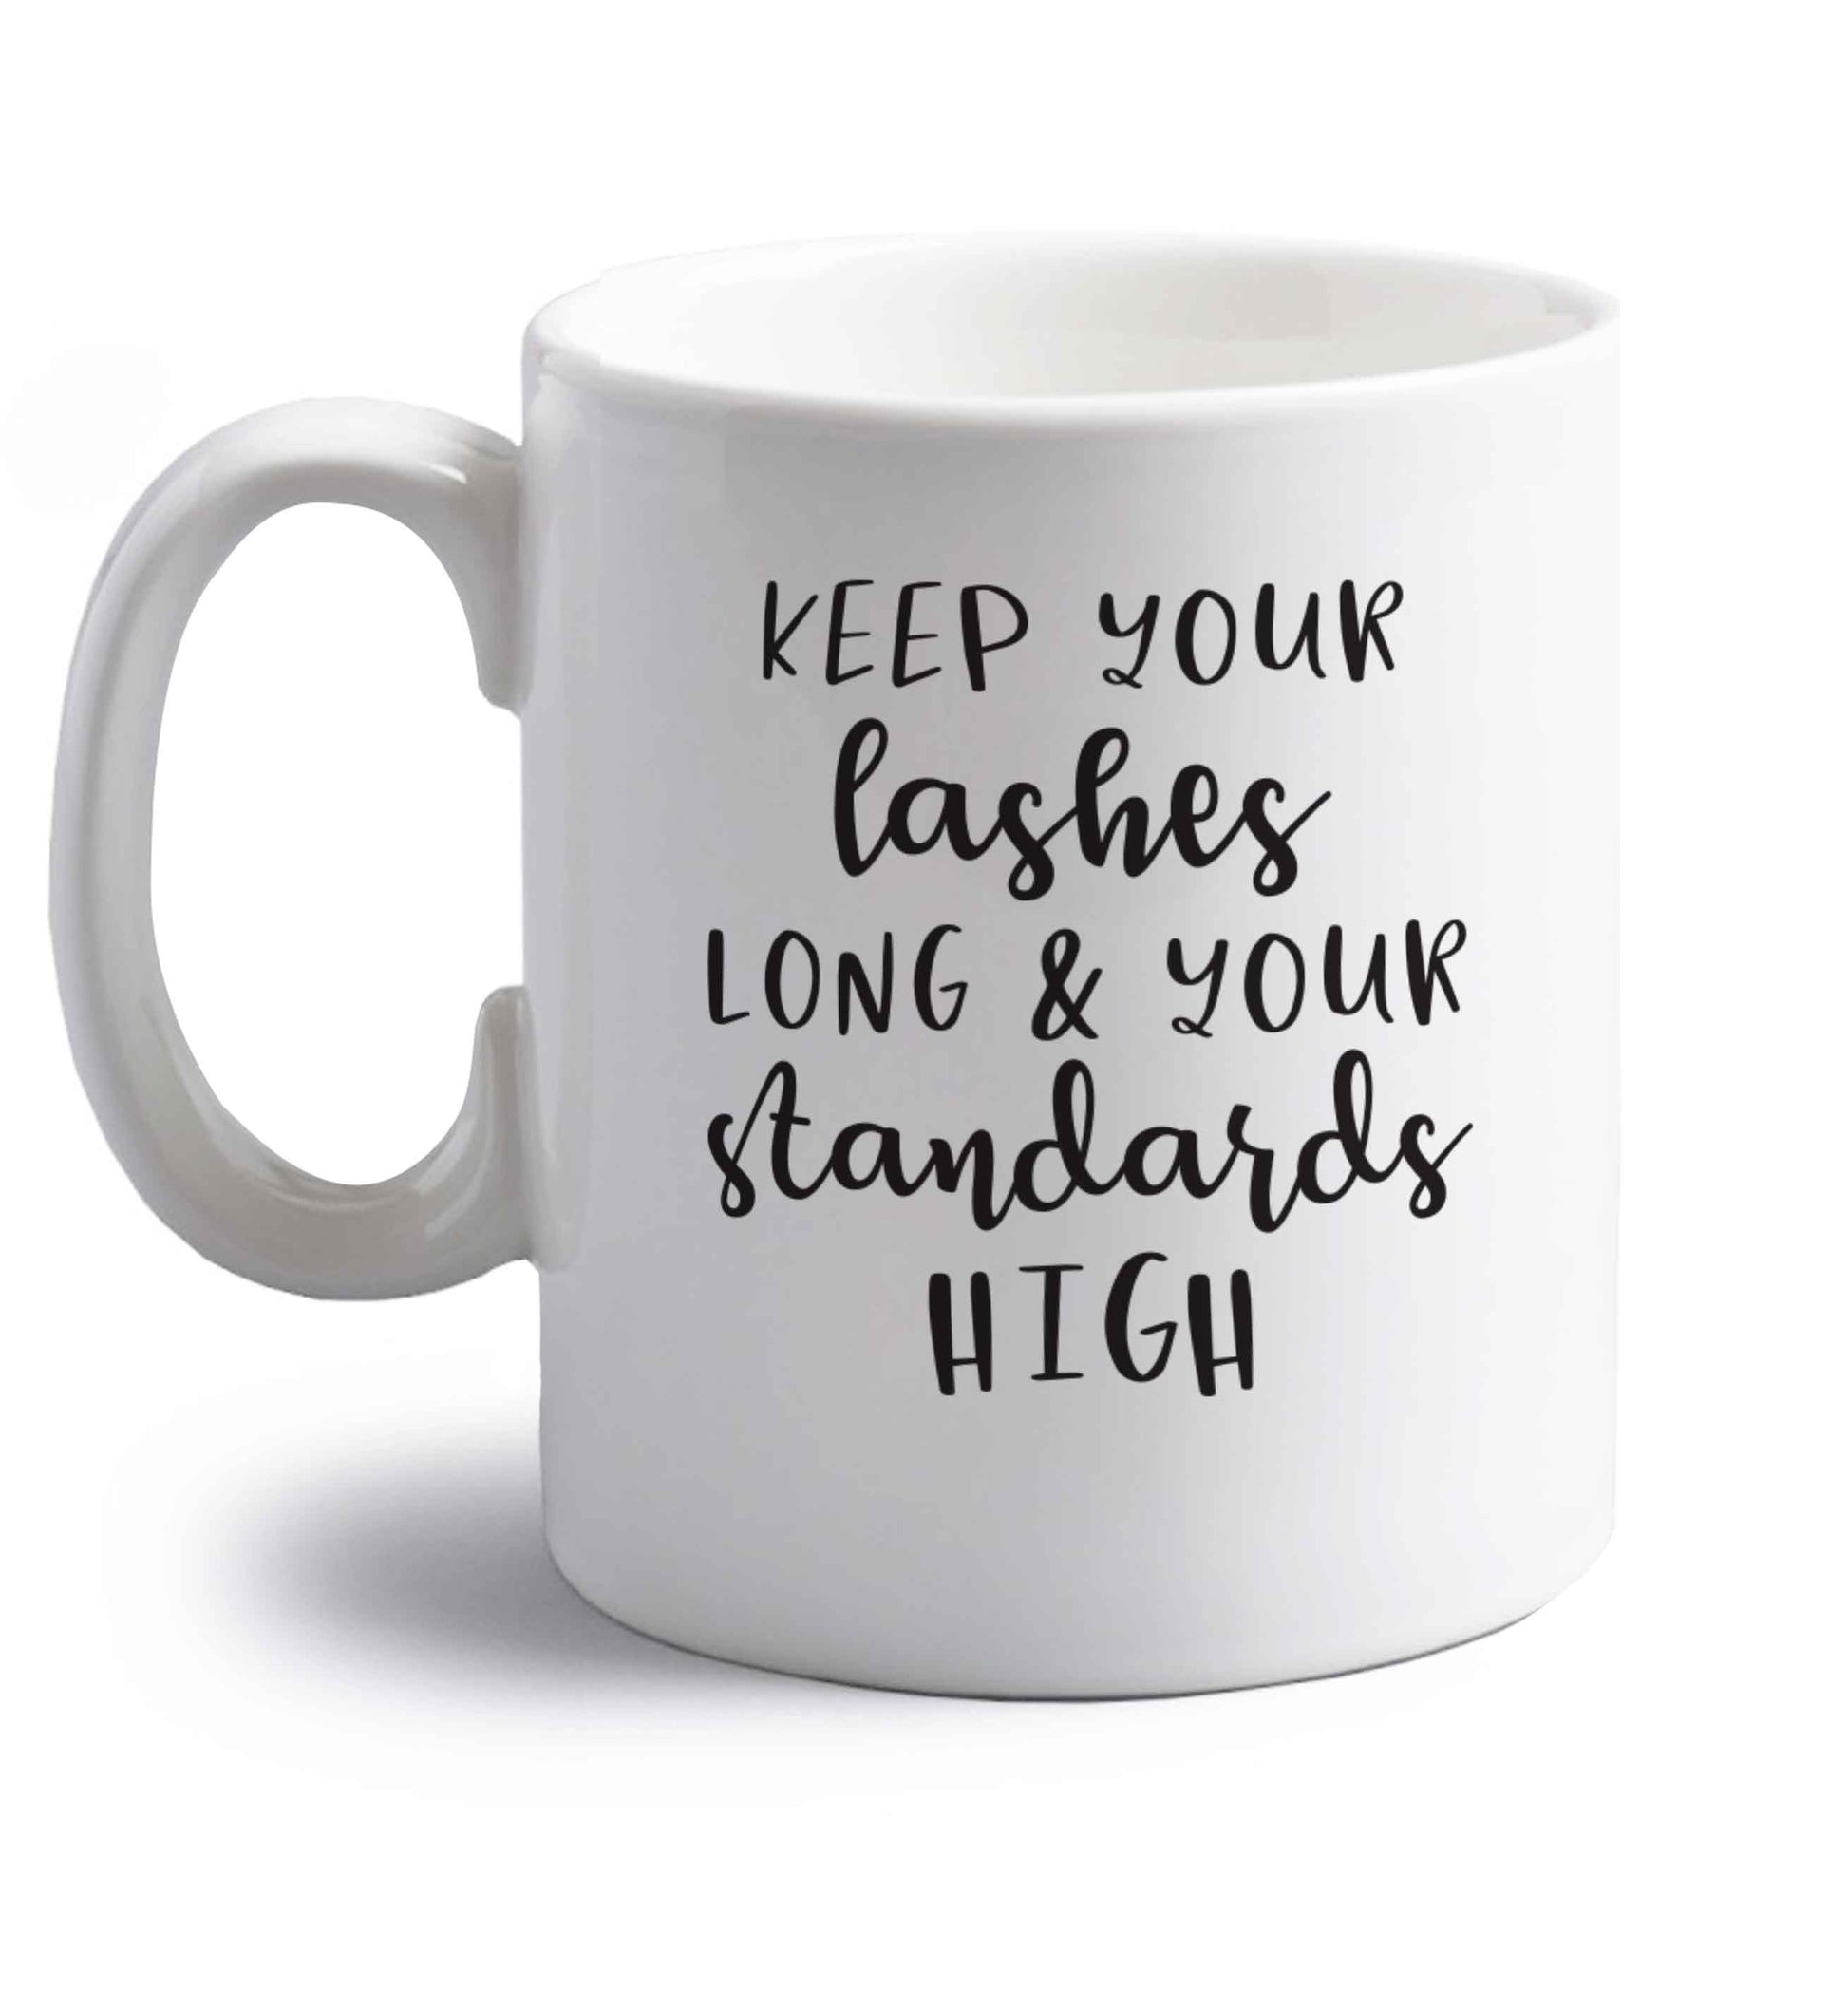 Keep your lashes long and your standards high right handed white ceramic mug 